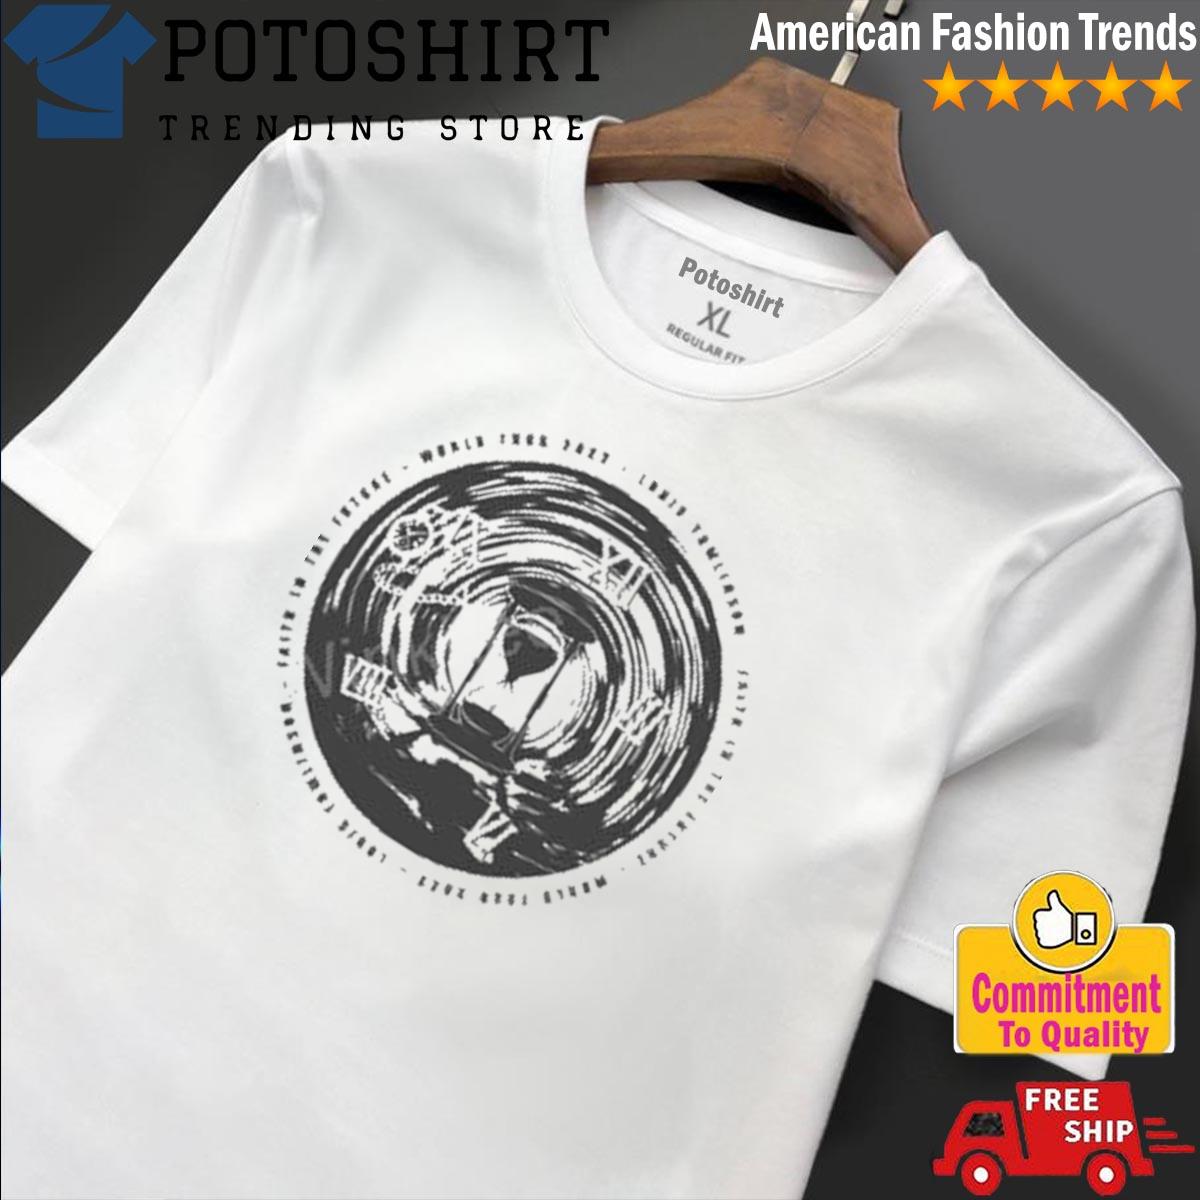 Louis Tomlinson, Faith in the future eye graphic | Active T-Shirt